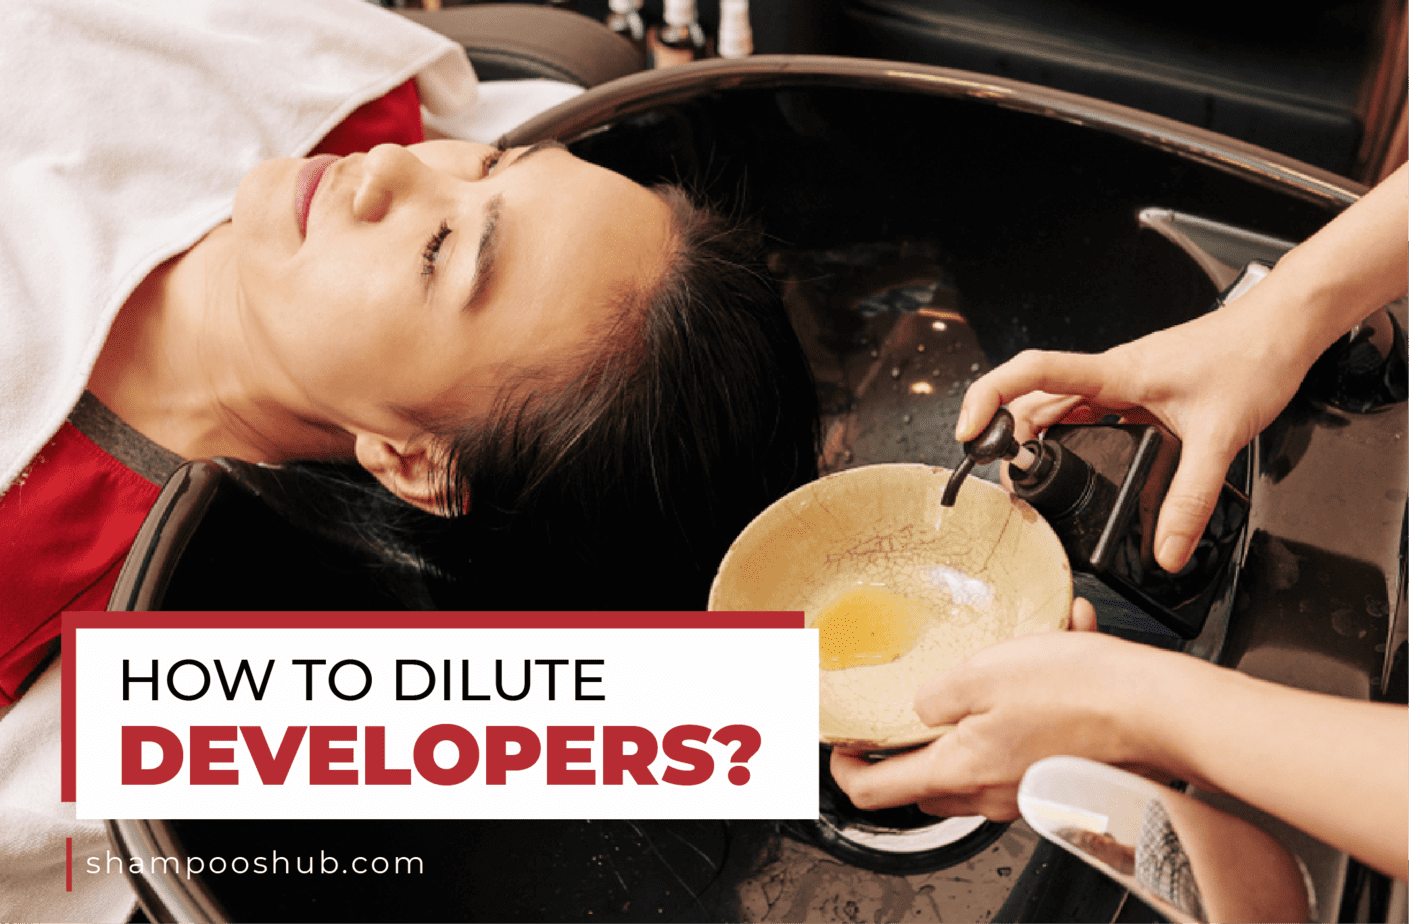 How To Dilute Developers?